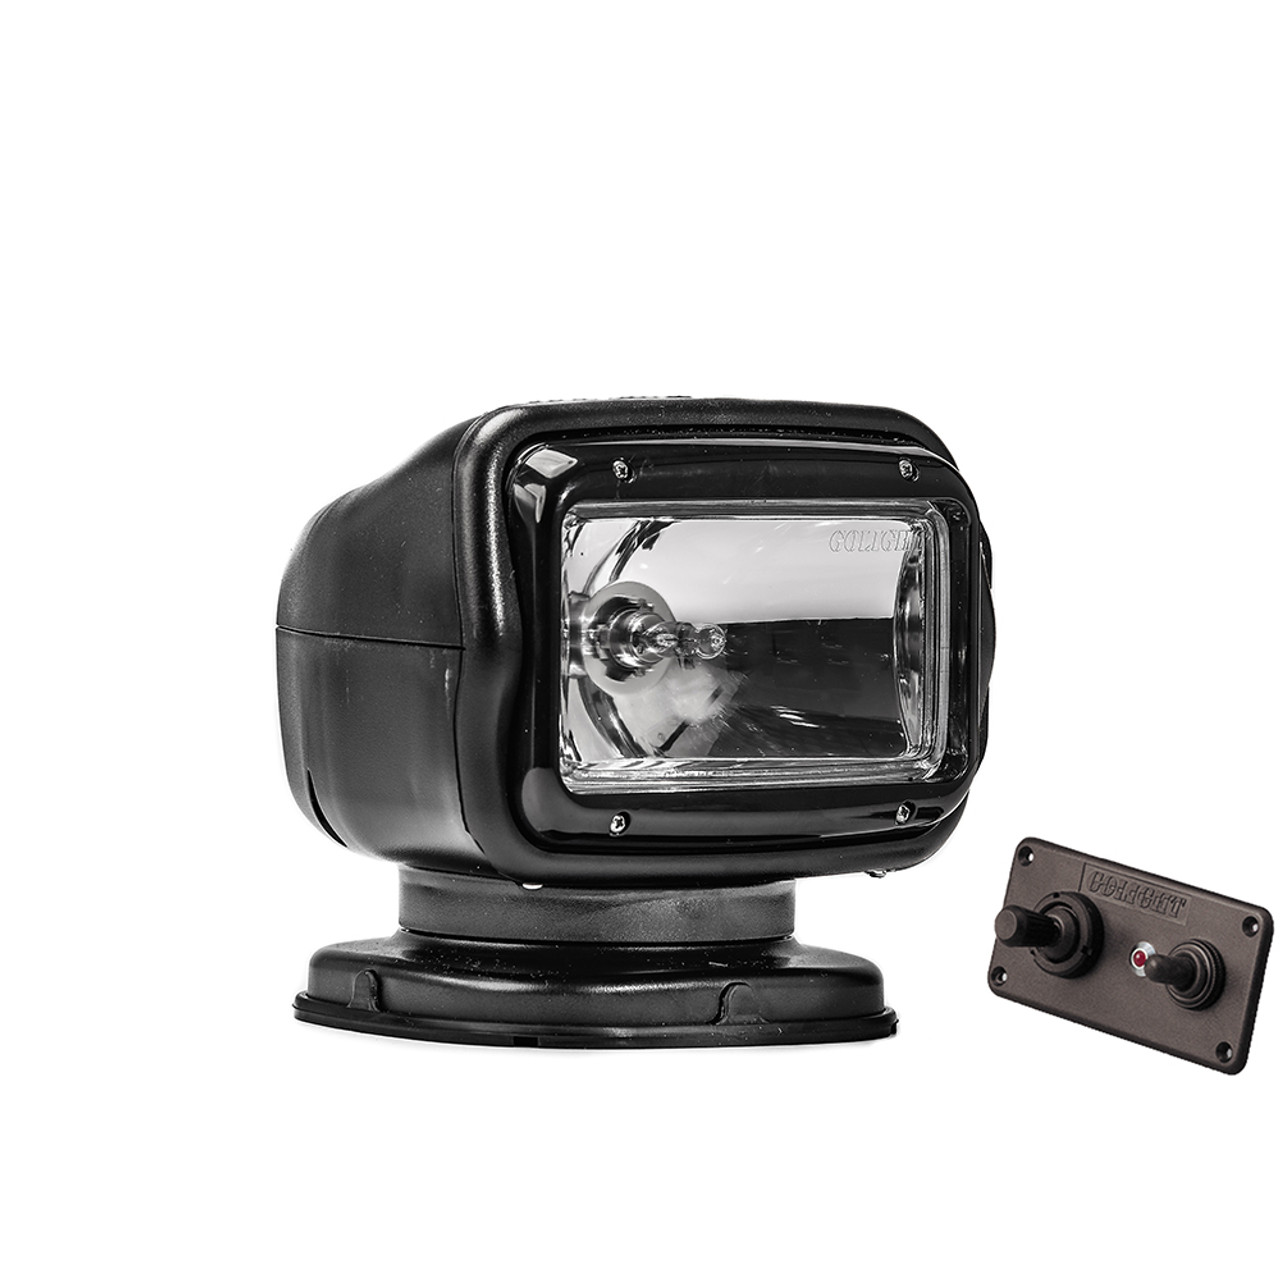 Golight 2021  Remote Control Halogen Searchlight, with Permanent mount, includes Hardwired Dash Mount Remote, 20 ft Wiring Harness with Quick Disconnects for Easy Installation, Mounting Hardware, and Rockguard Lens Cover, available in White or Black